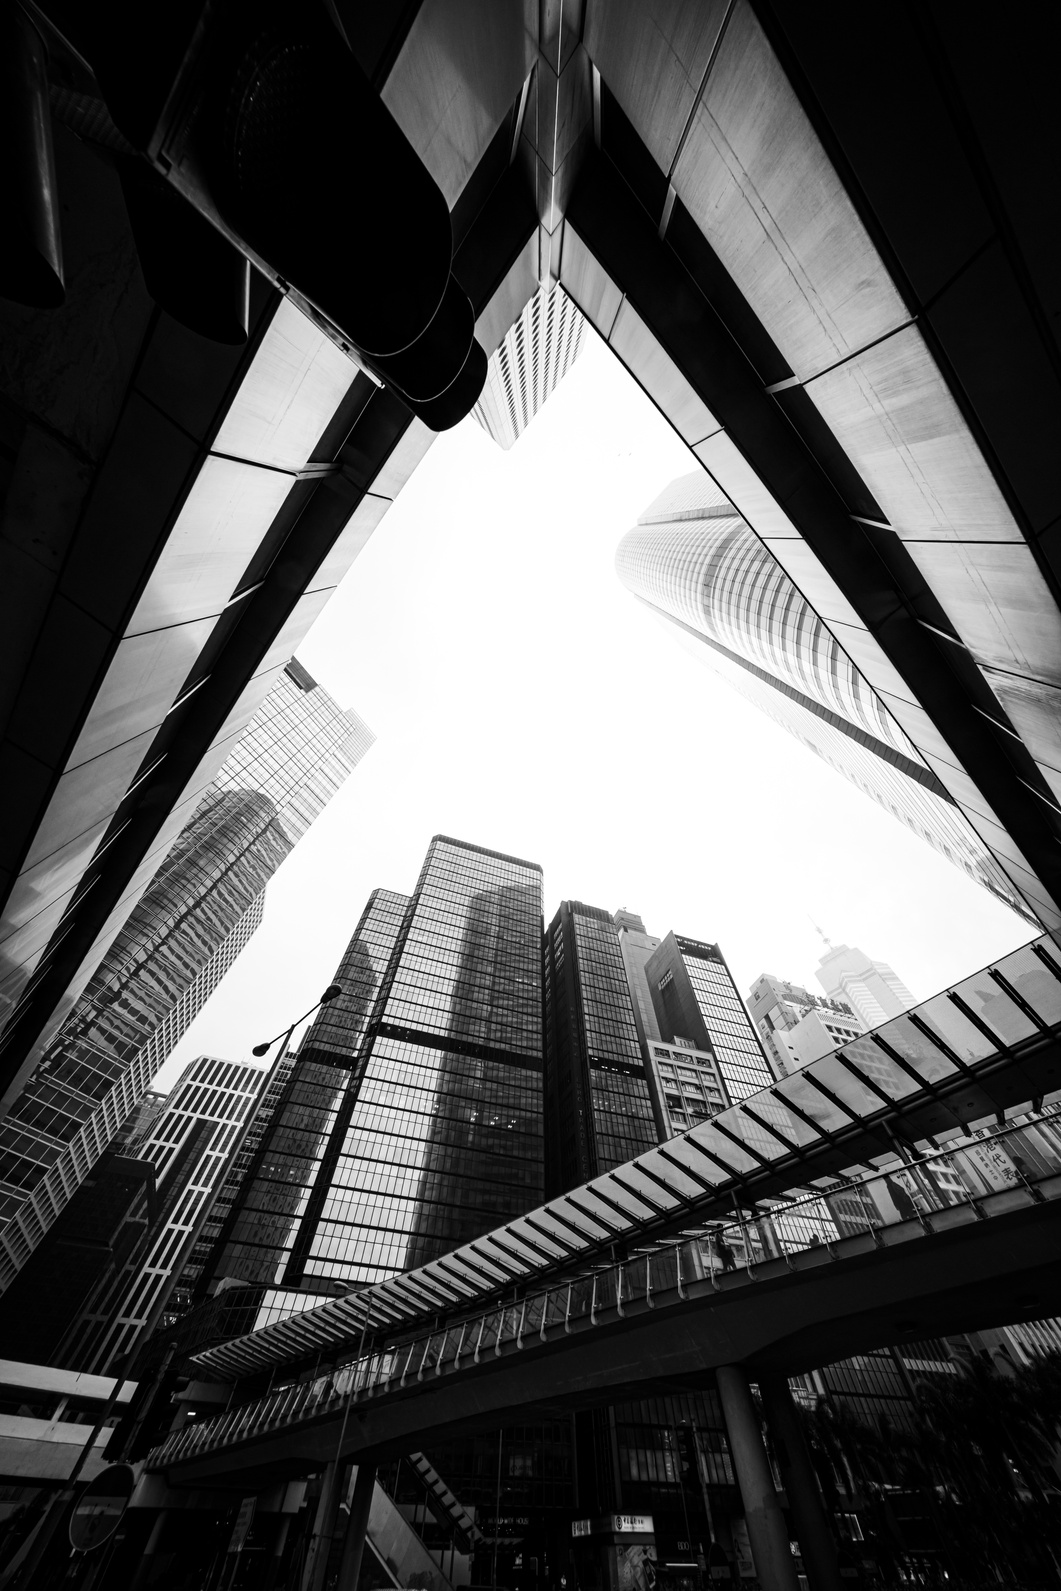 The Hong Kong Corporate Buildings (black and white)